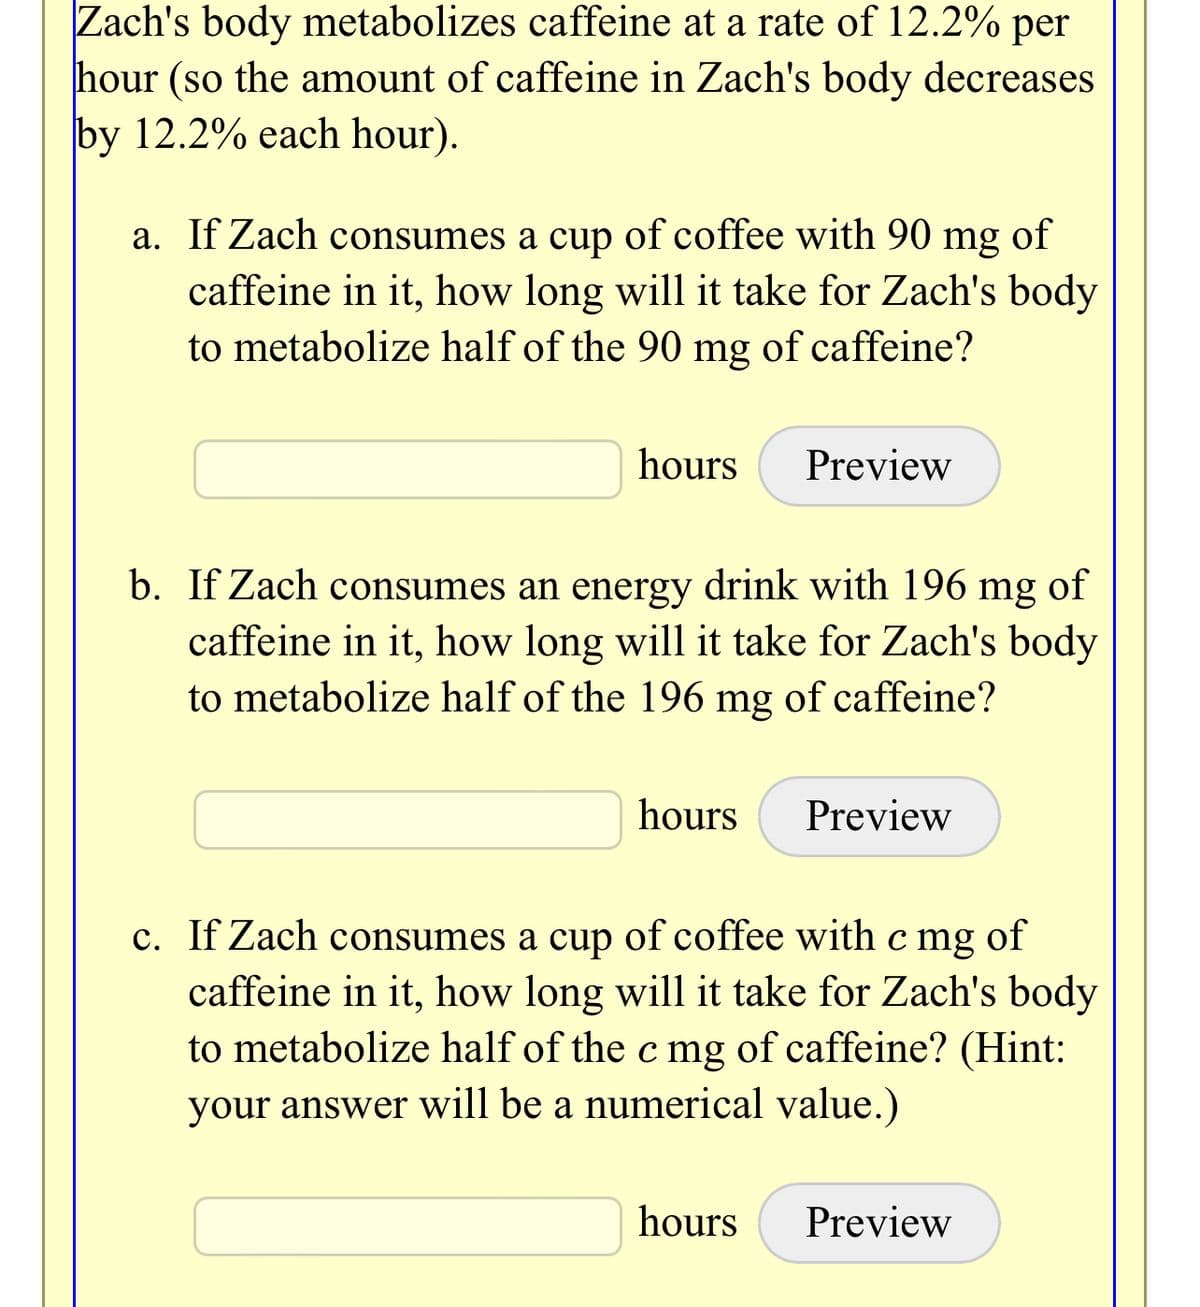 Zach's body metabolizes caffeine at a rate of 12.2% per
hour (so the amount of caffeine in Zach's body decreases
by 12.2% each hour).
a. If Zach consumes a cup of coffee with 90
mg
of
caffeine in it, how long will it take for Zach's body
to metabolize half of the 90 mg of caffeine?
hours
Preview
b. If Zach consumes an energy drink with 196 mg
caffeine in it, how long will it take for Zach's body
to metabolize half of the 196 mg of caffeine?
of
hours
Preview
c. If Zach consumes a cup of coffee with c mg of
caffeine in it, how long will it take for Zach's body
to metabolize half of the c mg of caffeine? (Hint:
your answer will be a numerical value.)
hours
Preview
